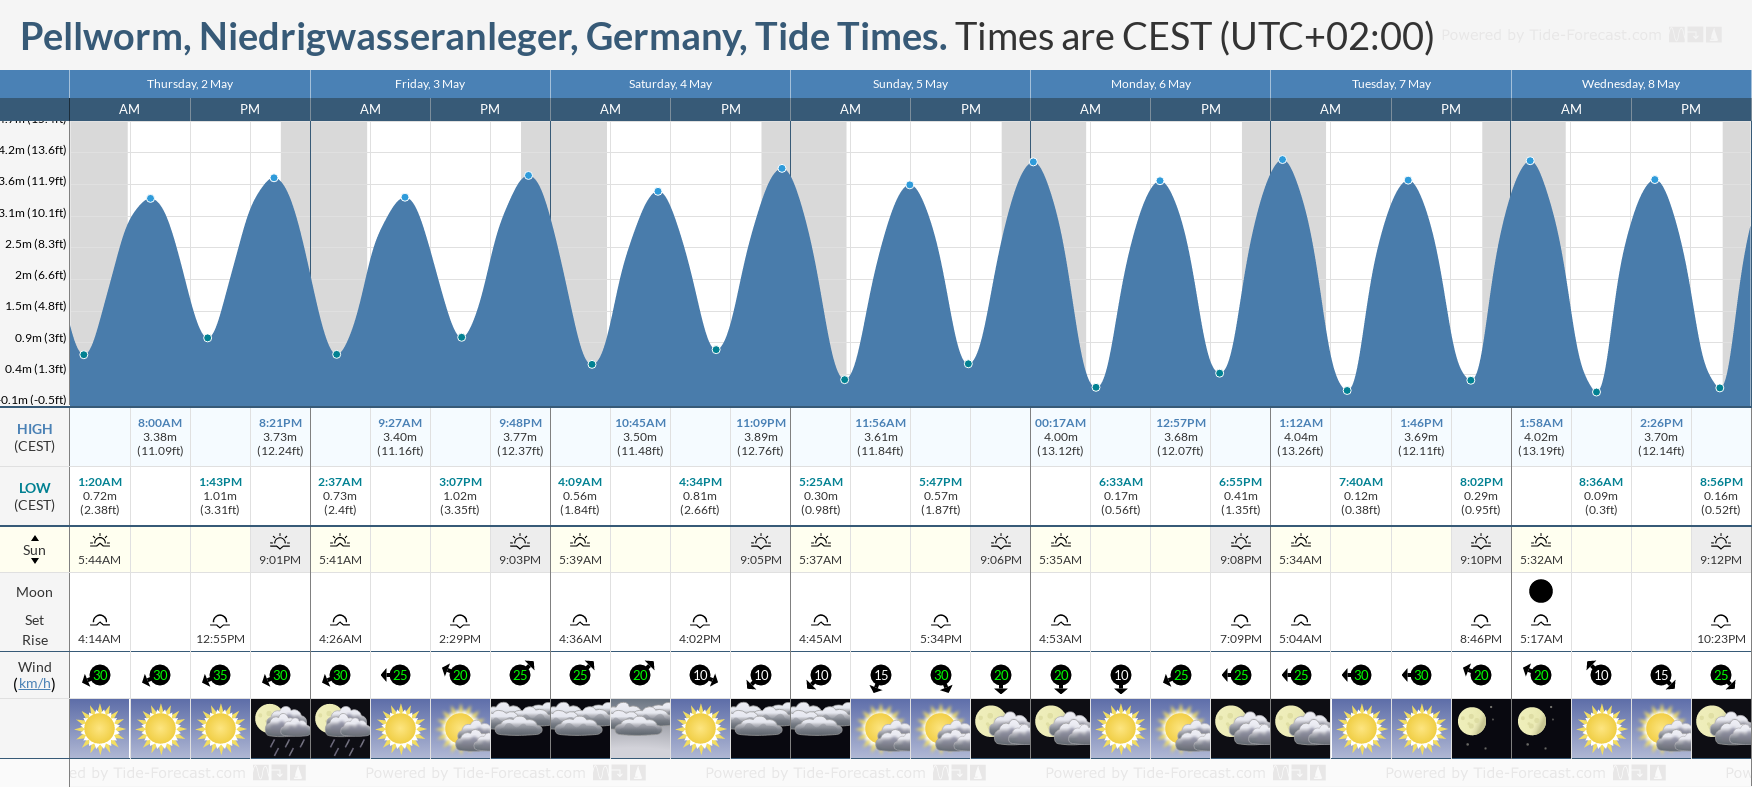 Pellworm, Niedrigwasseranleger, Germany Tide Chart including high and low tide times for the next 7 days